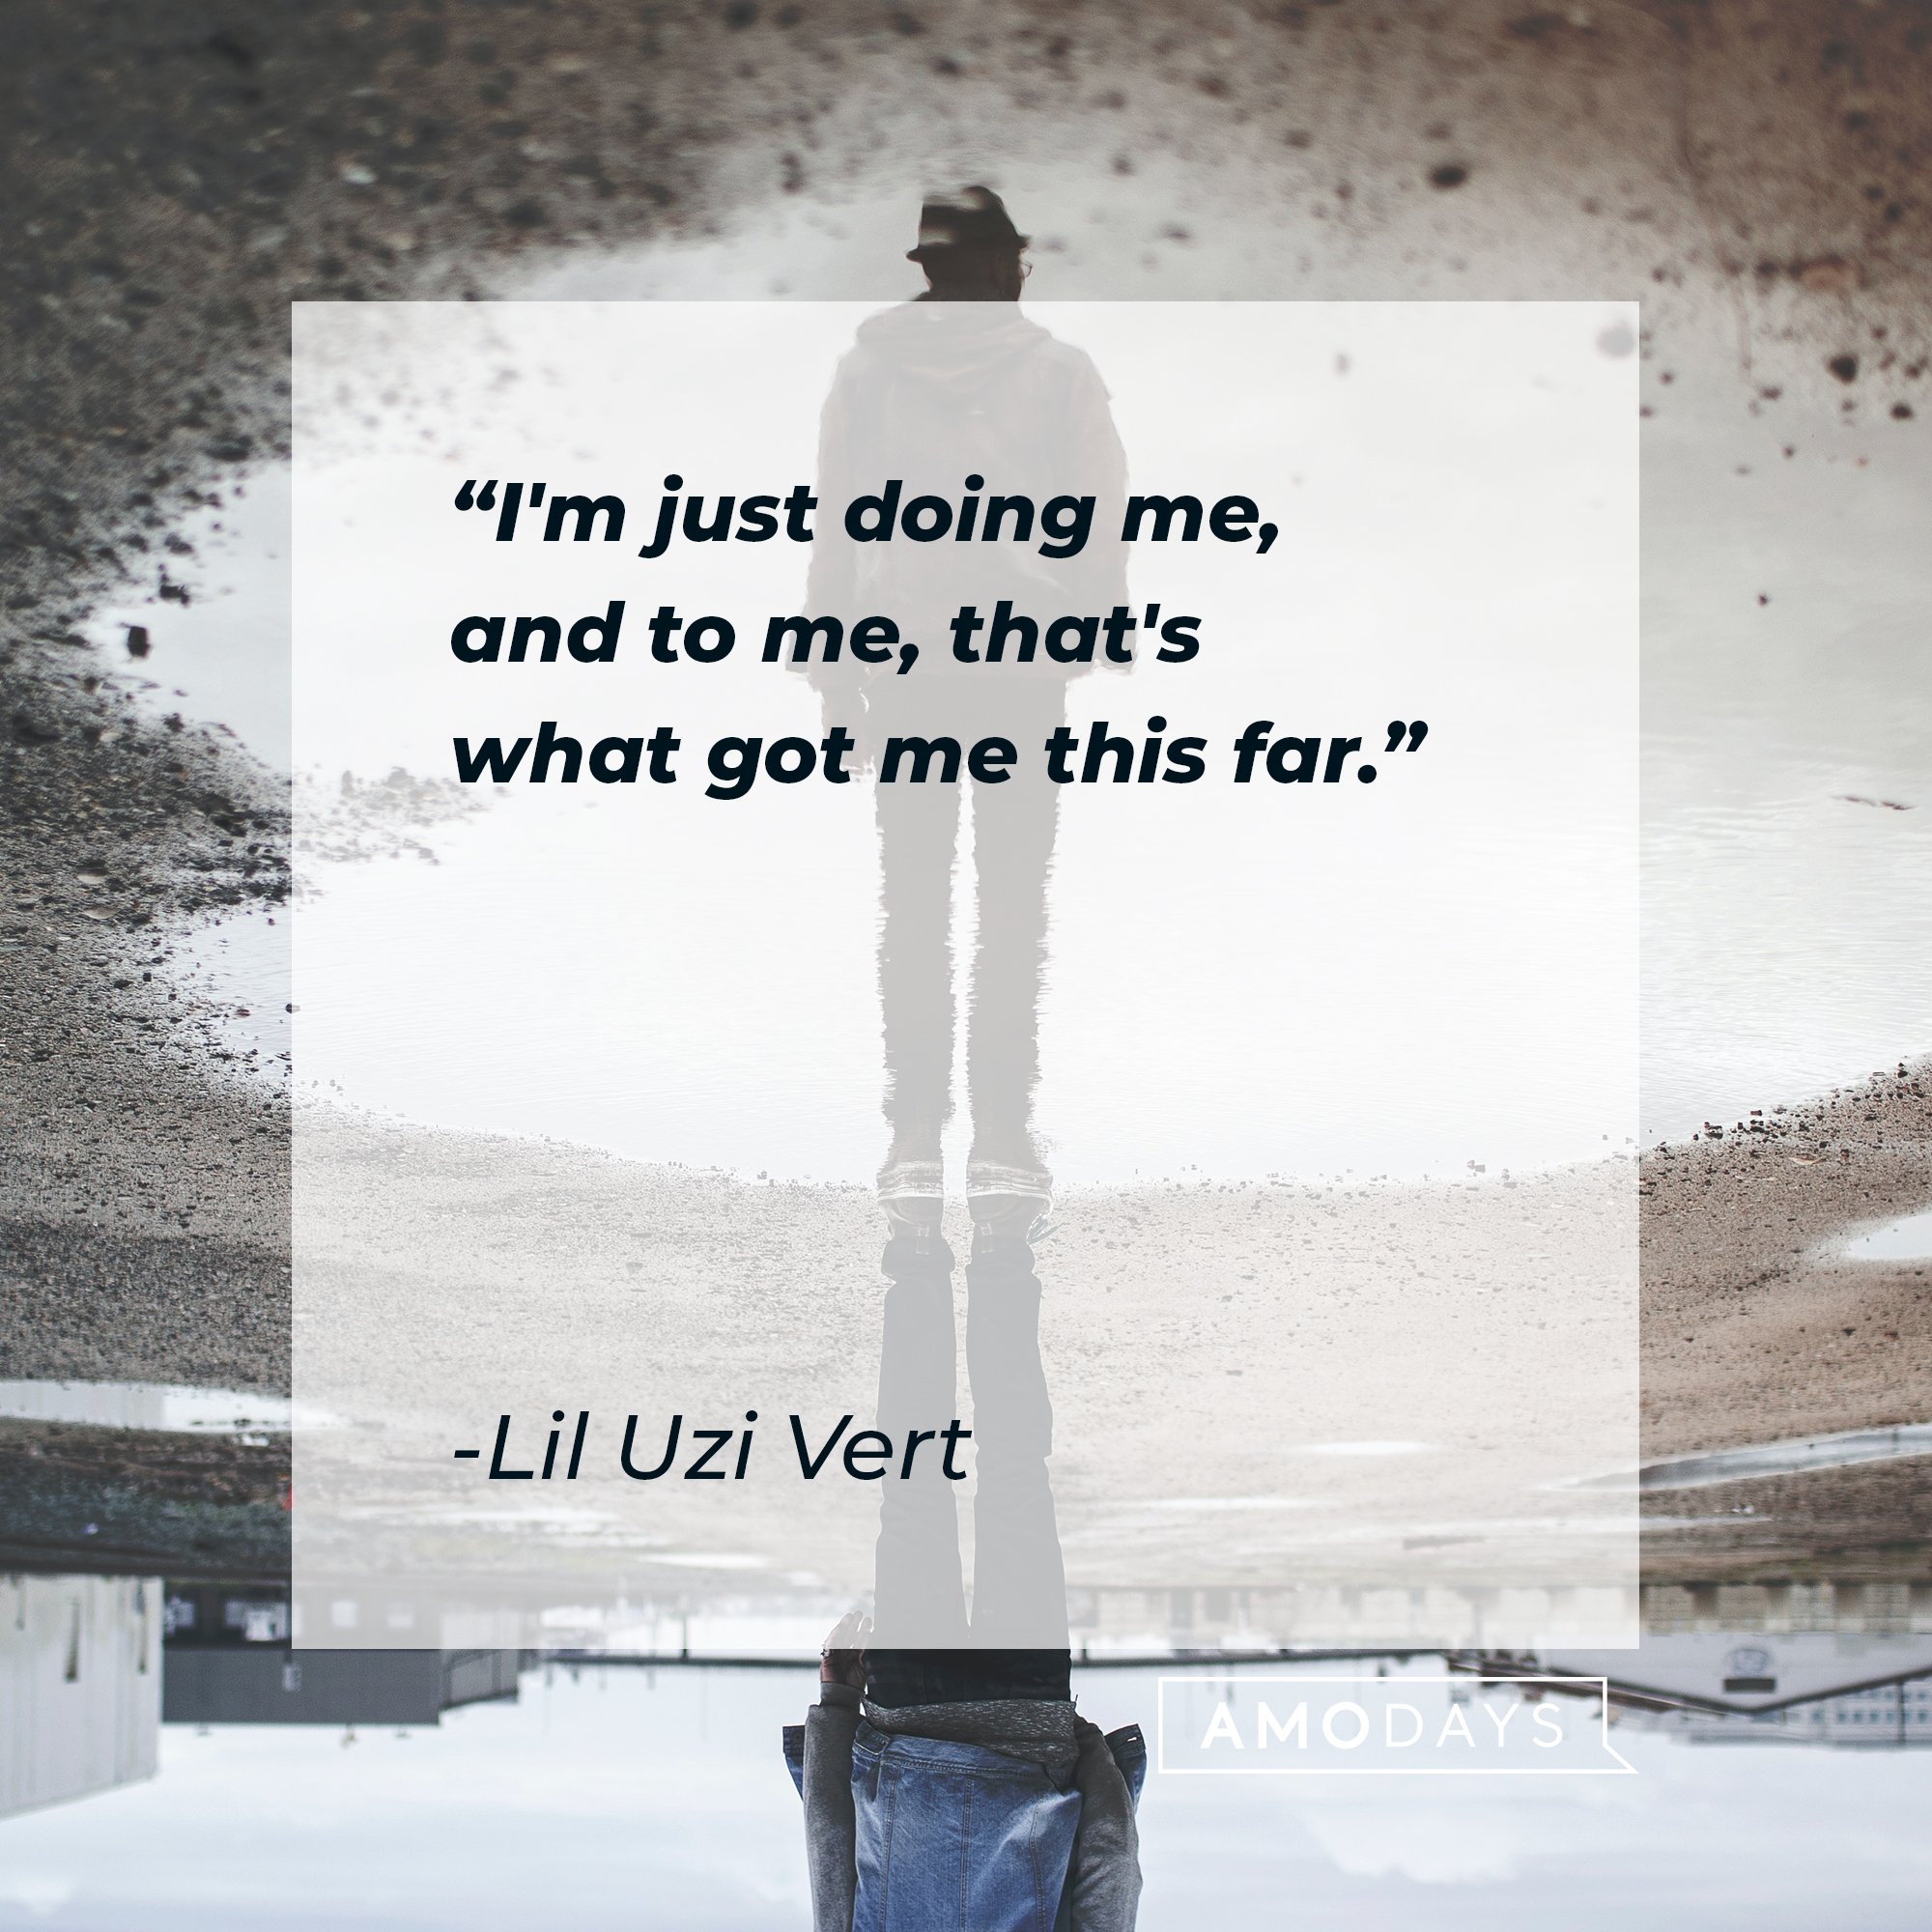 Lil Uzi Vert’s quote: "I'm just doing me, and to me, that's what got me this far." | Image: AmoDays